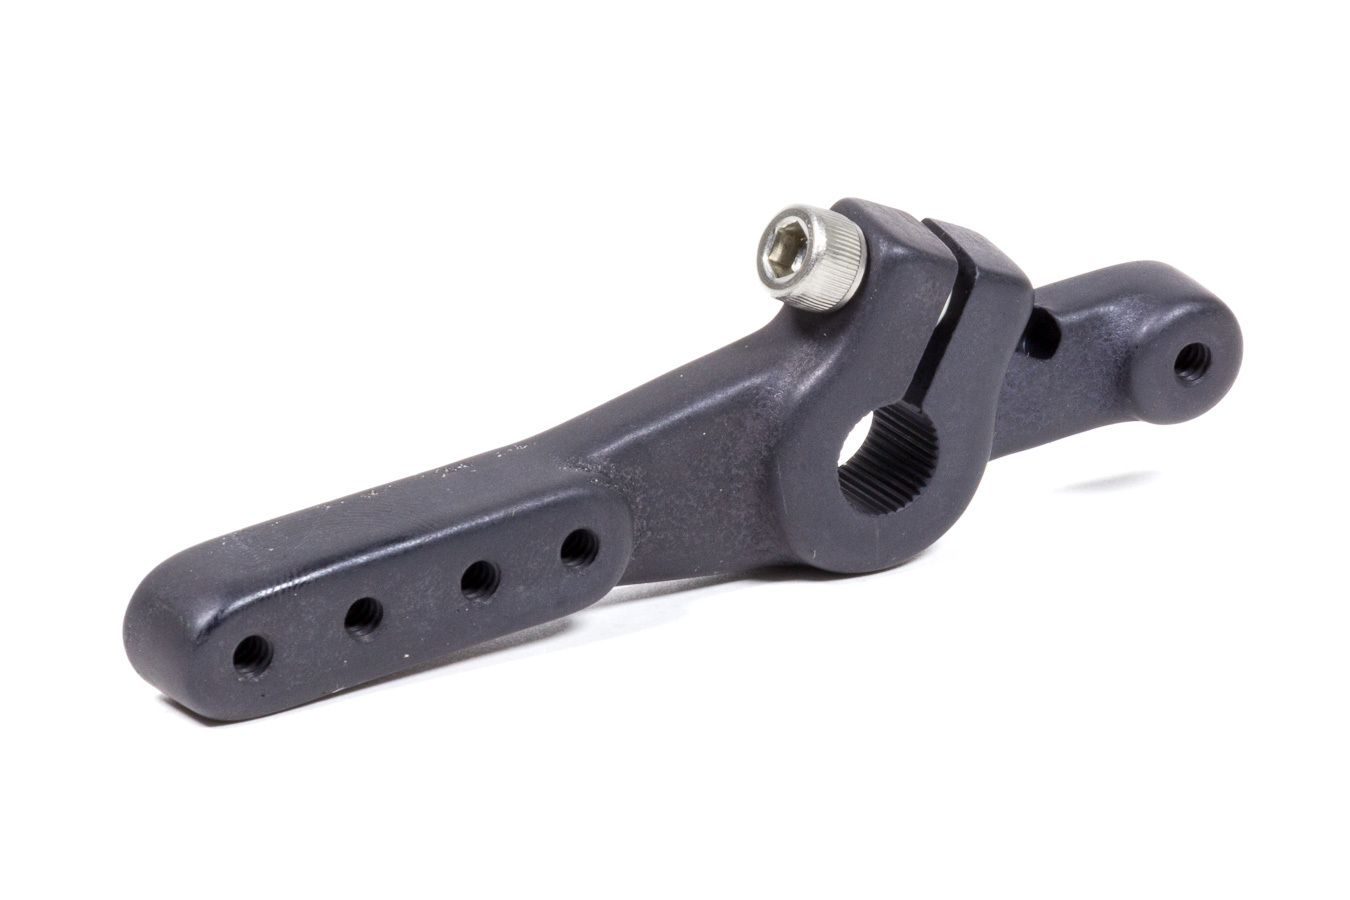 Enderle 4011B44 Fuel Injection Arm, Double Ended, Aluminum, Black Anodized, Each